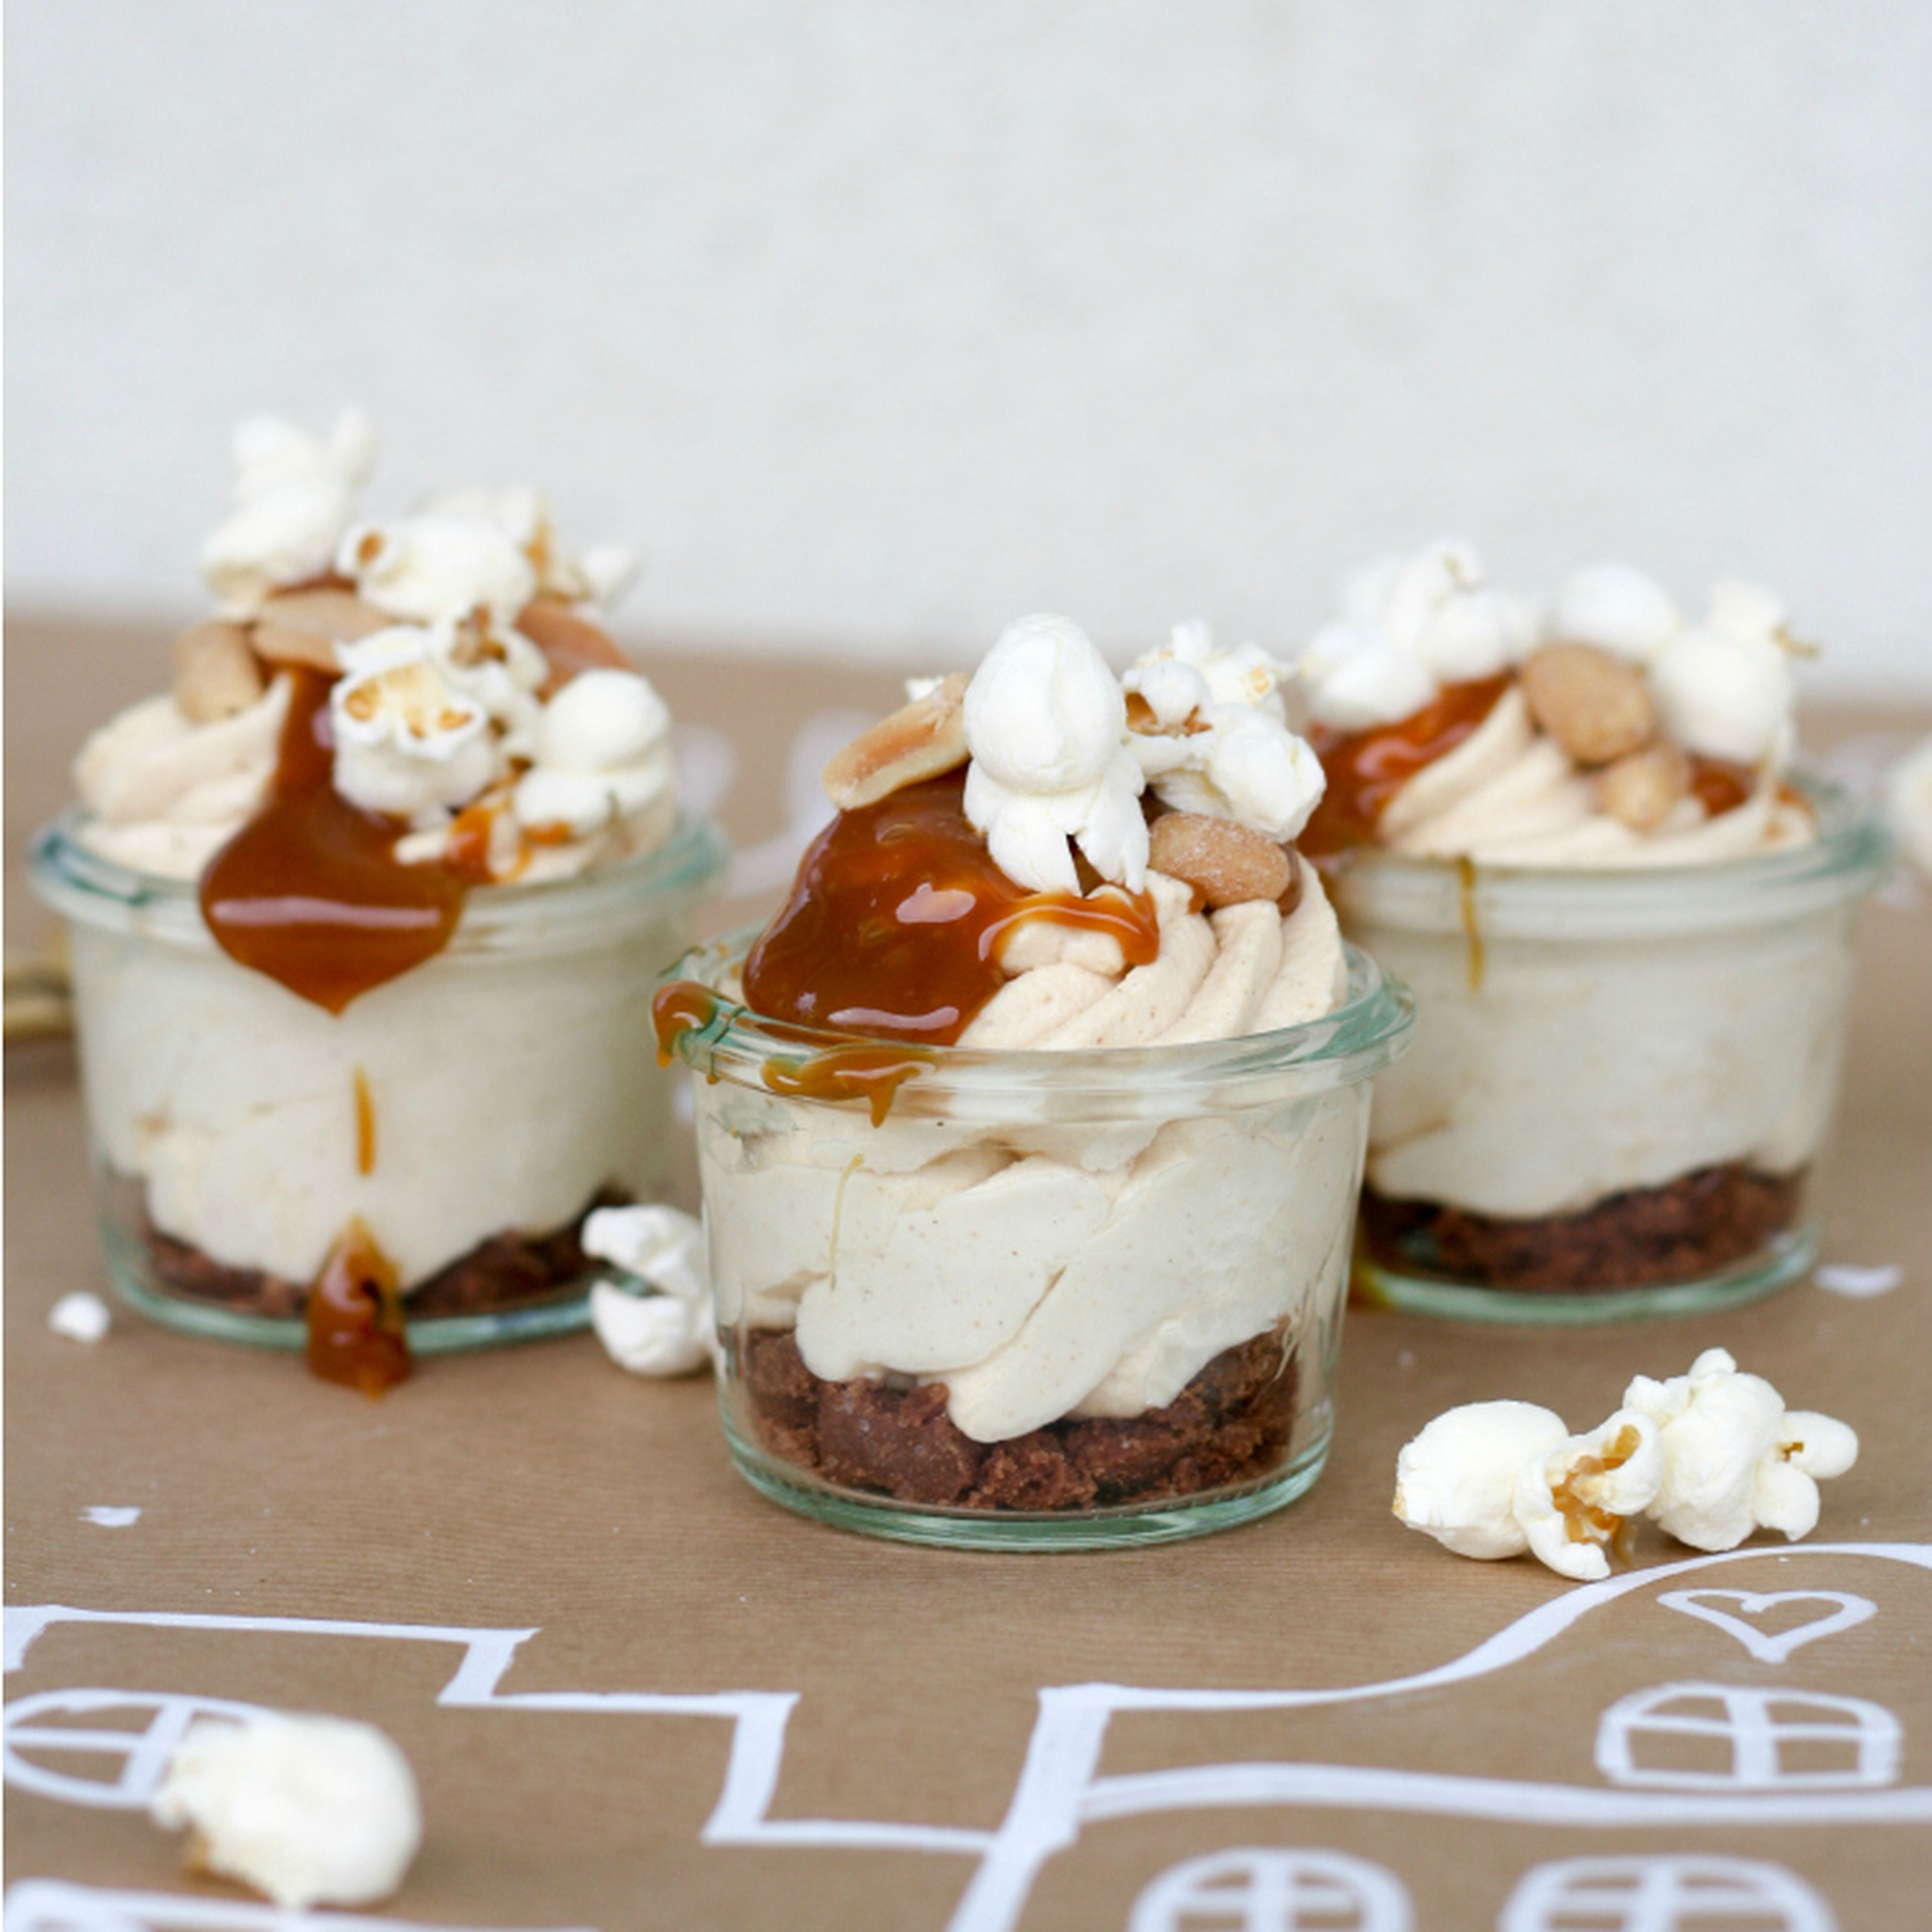 Peanut butter cheesecake in a glass